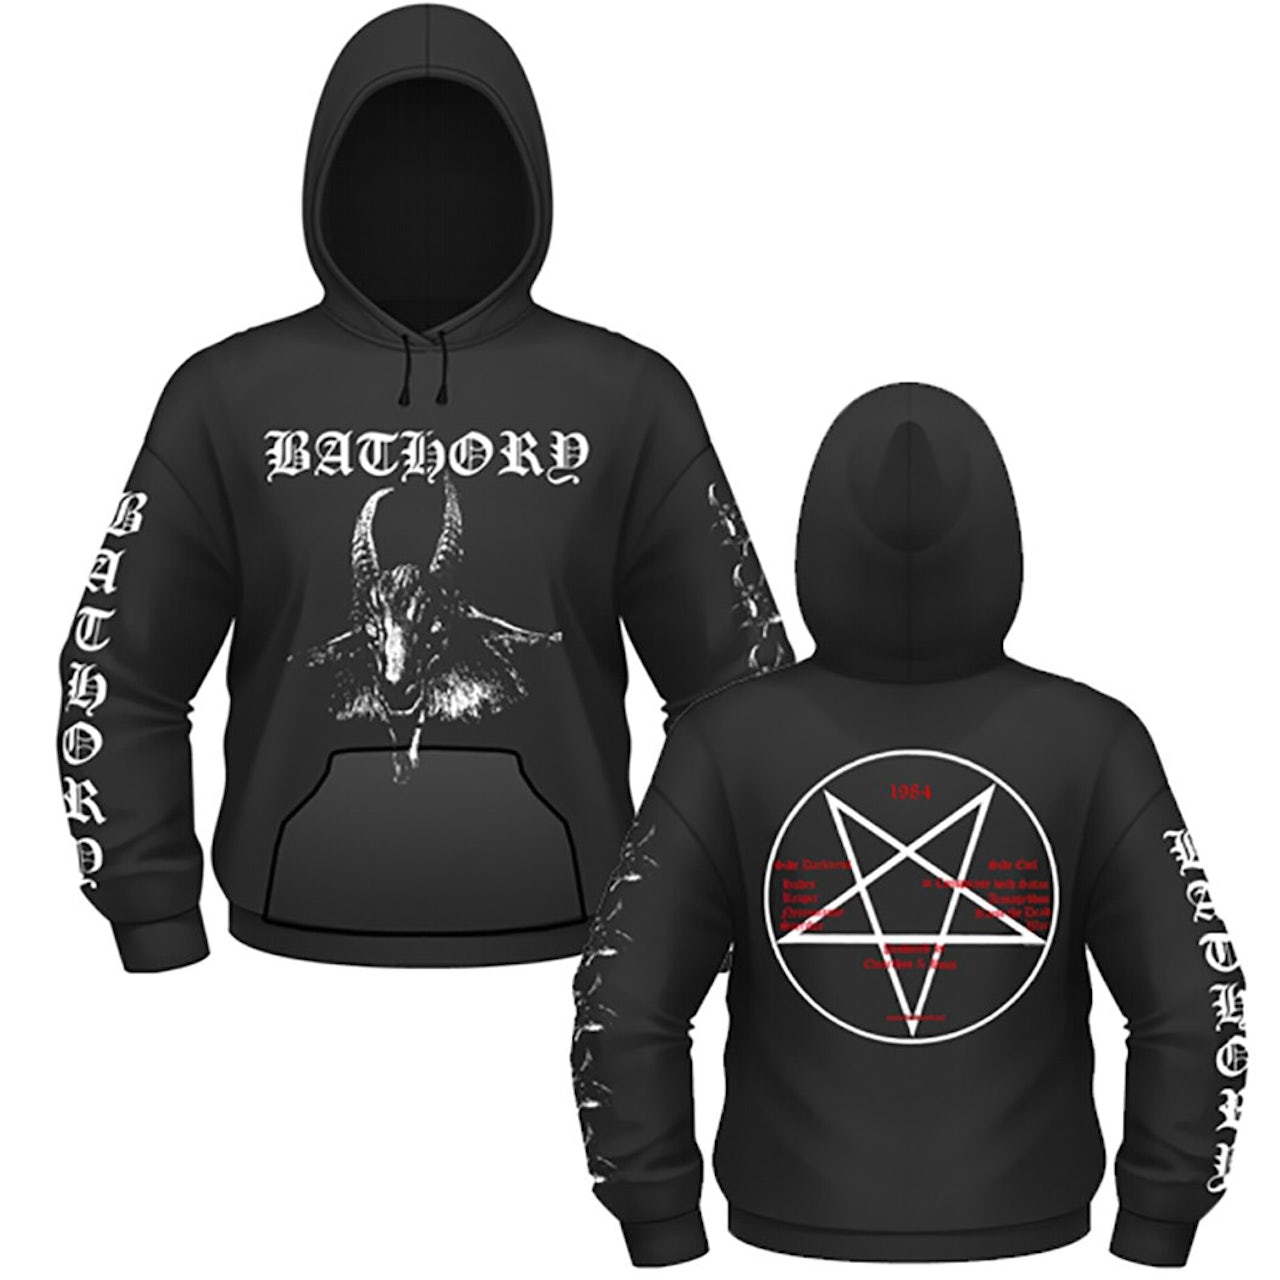 Bathory White Goat hoodie (double sided) – Rock Town Hollywood